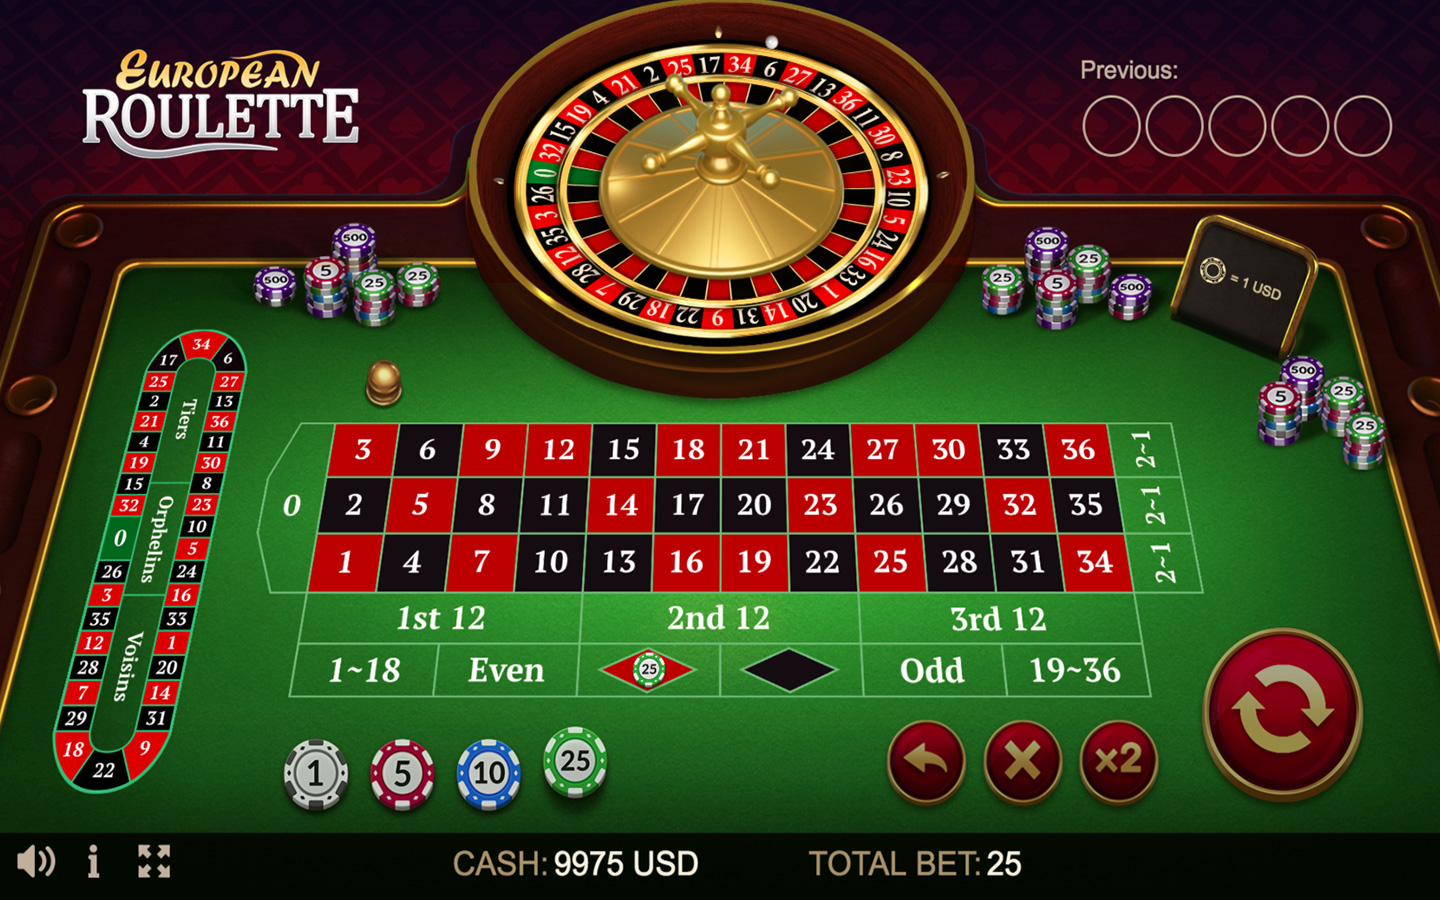 European Roulette | Learn How to Play European Roulette